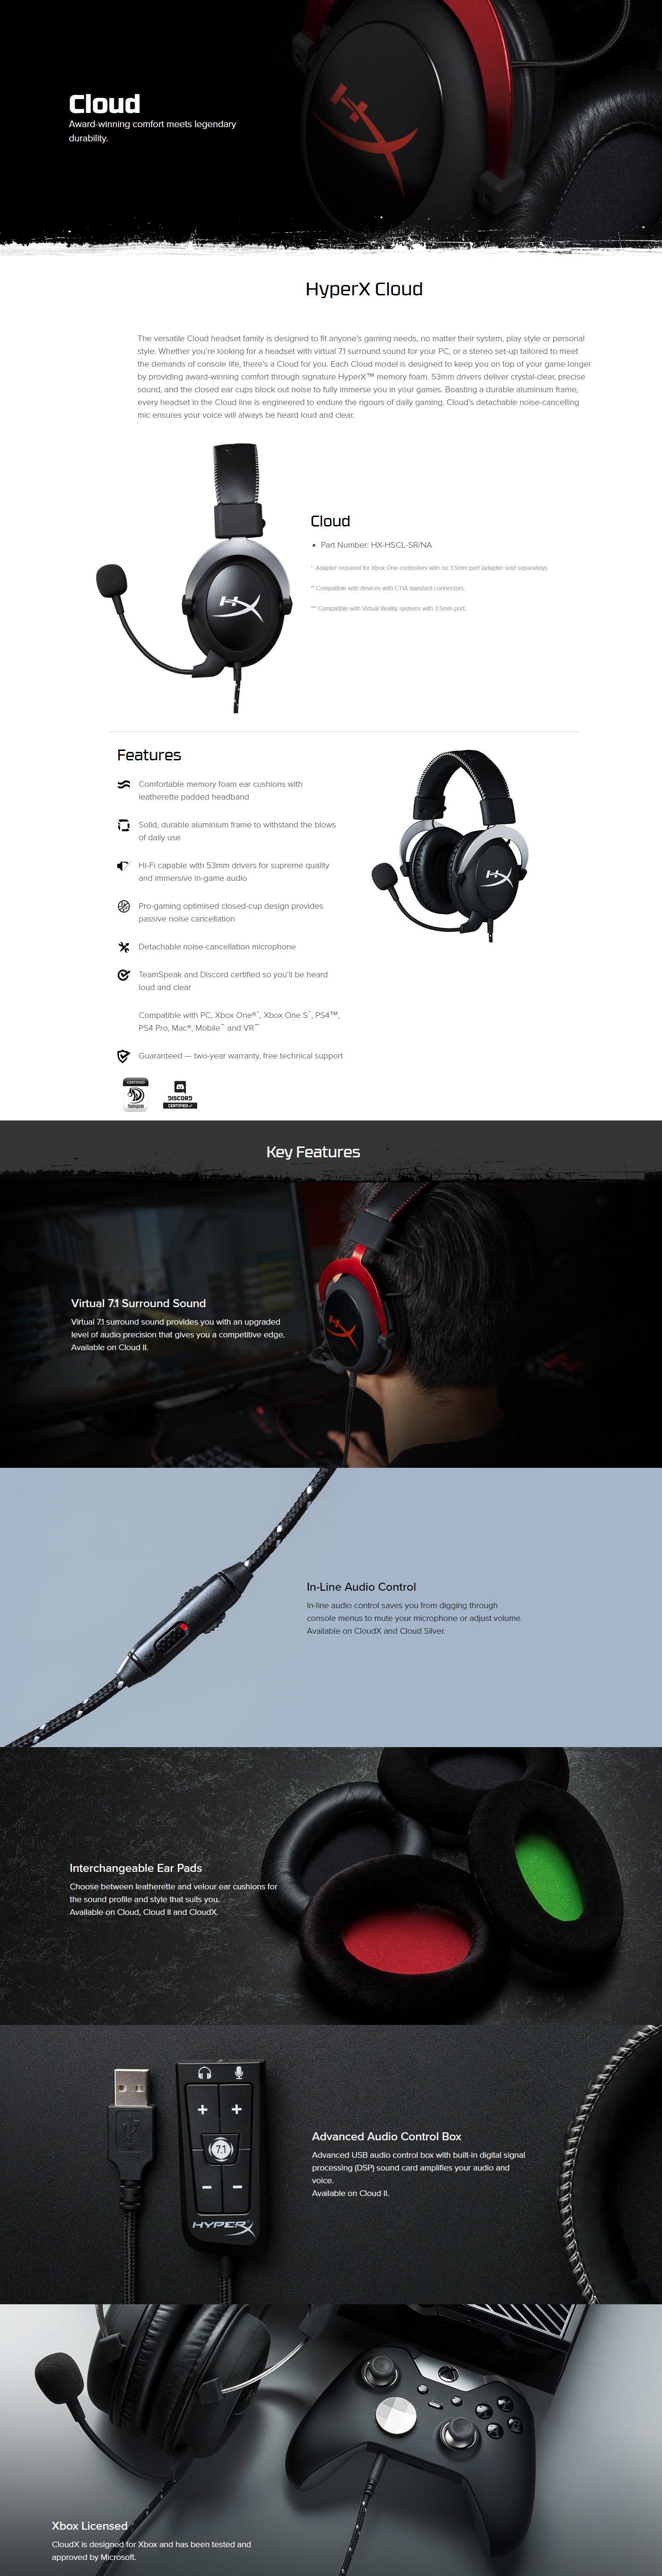 HyperX Cloud Silver Gaming Headset features